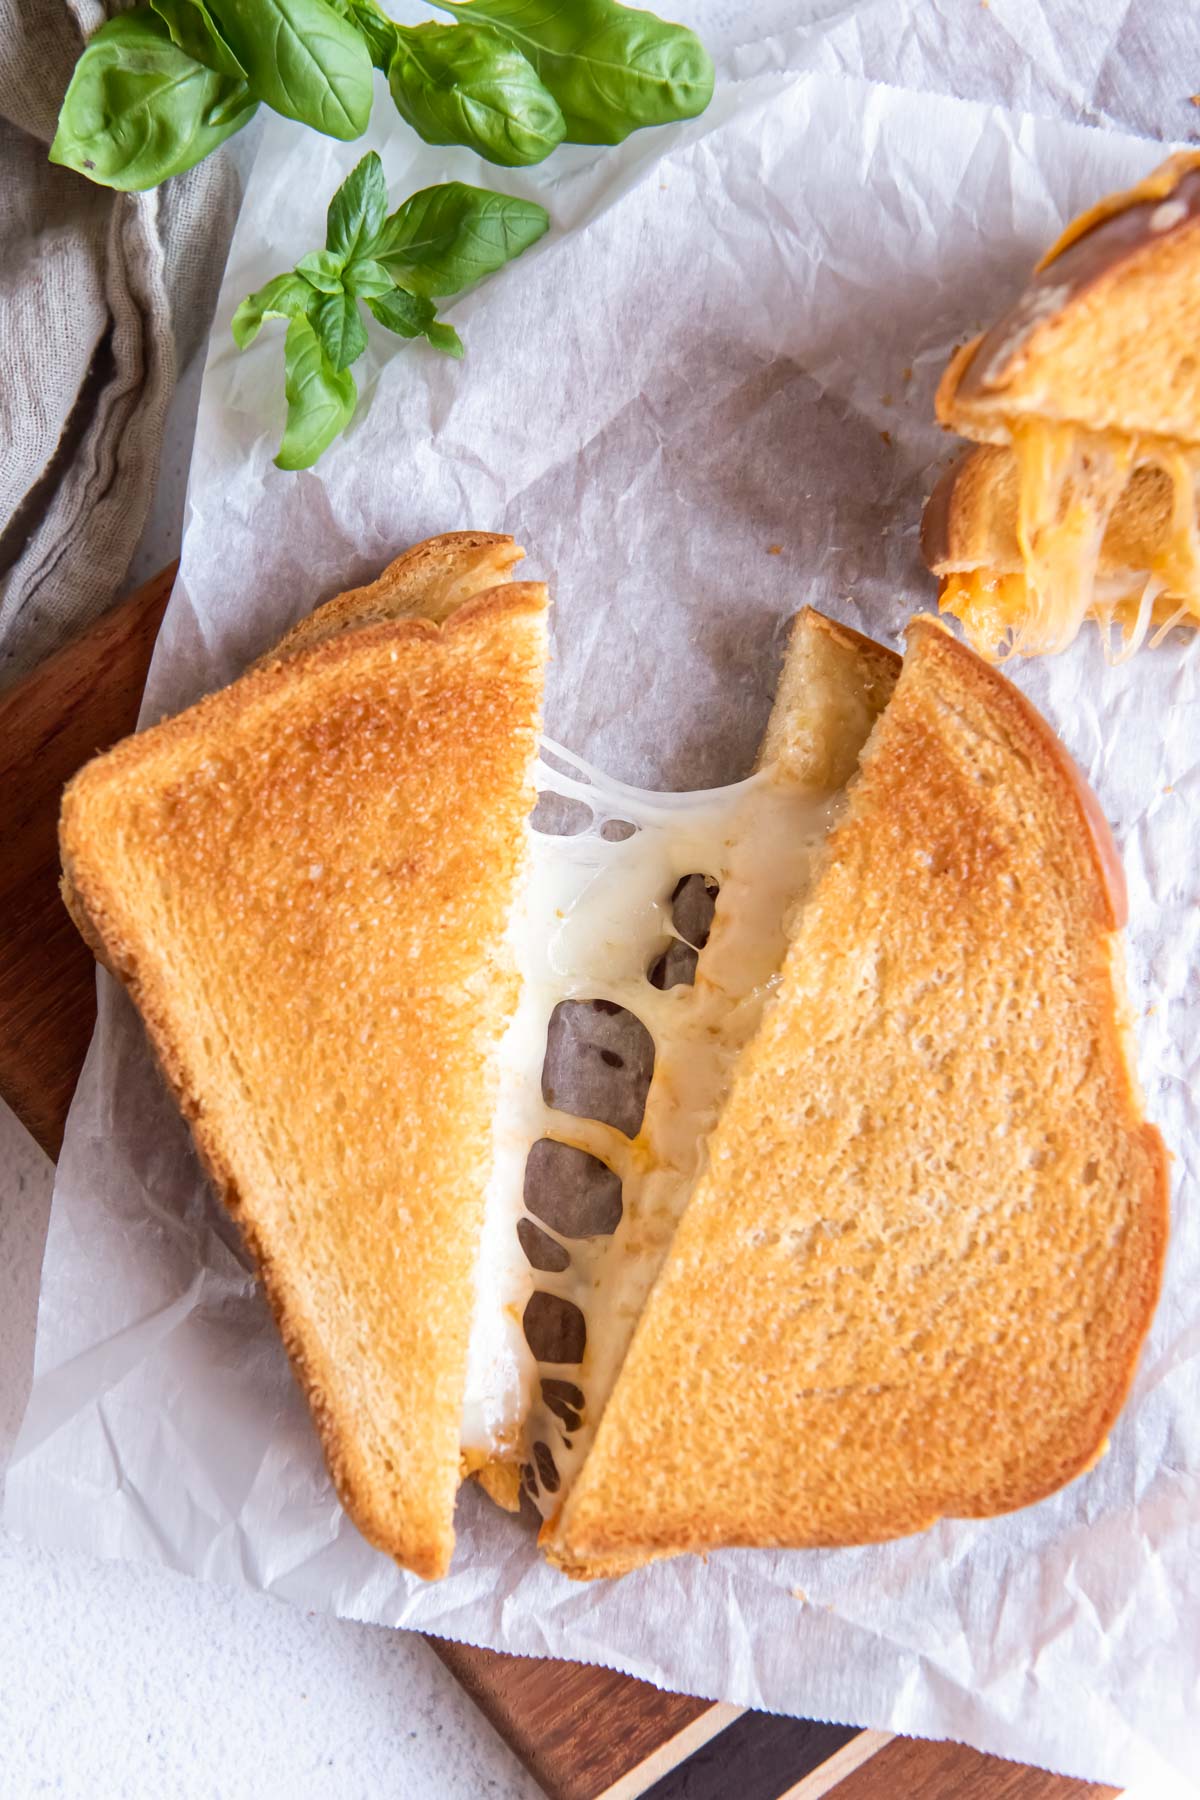 Air fryer grilled cheese sandwich cut in half showing melty cheese.